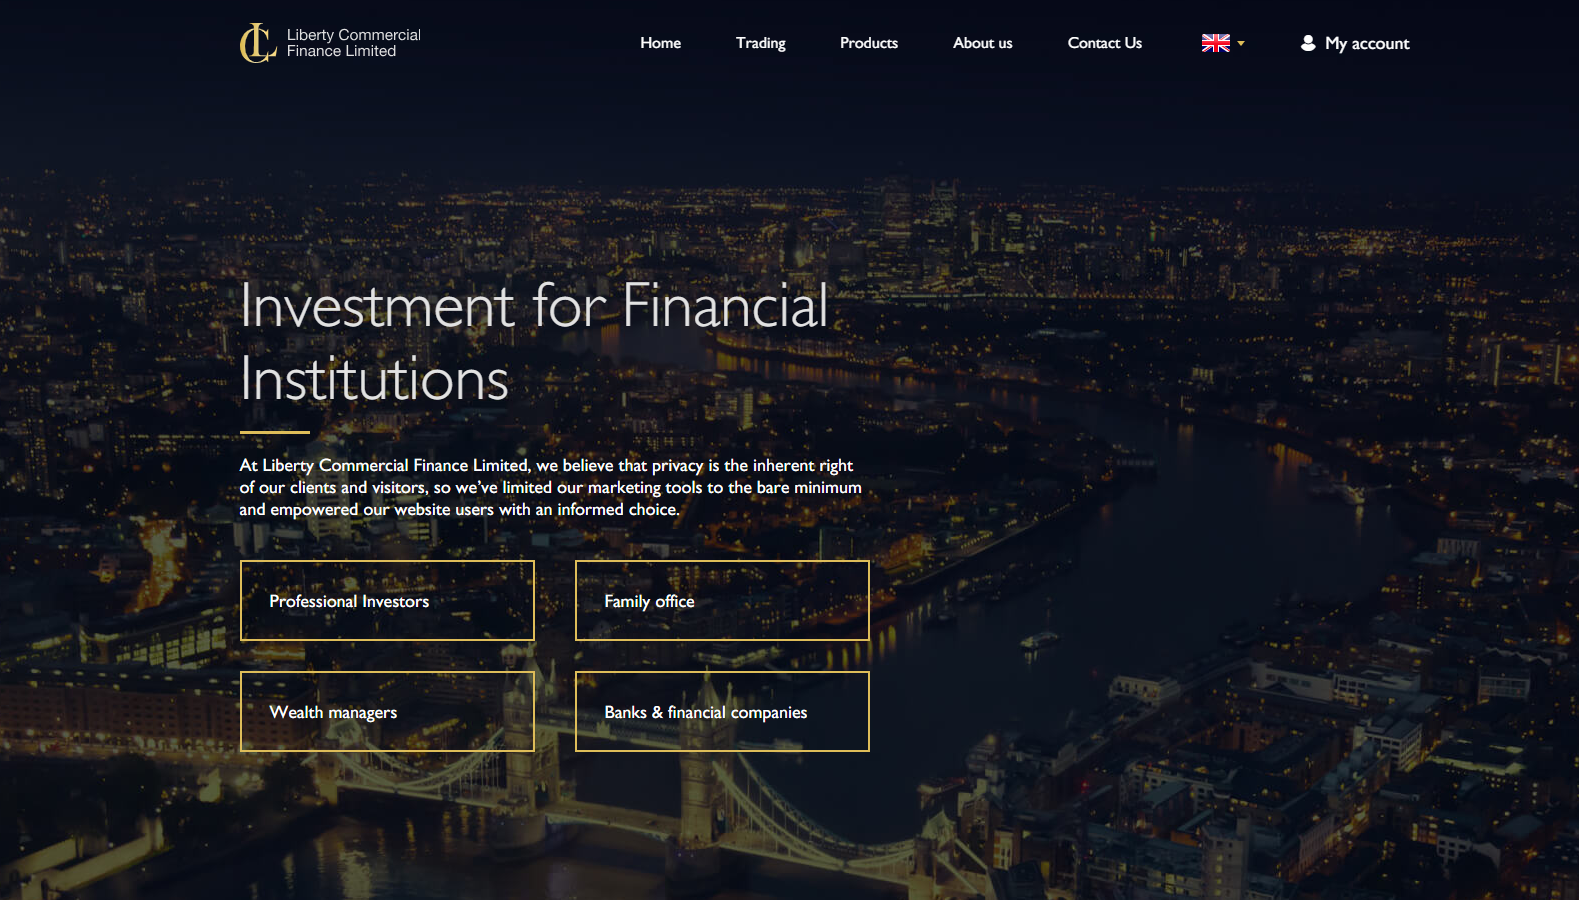 Liberty Commercial Finance Limtied site